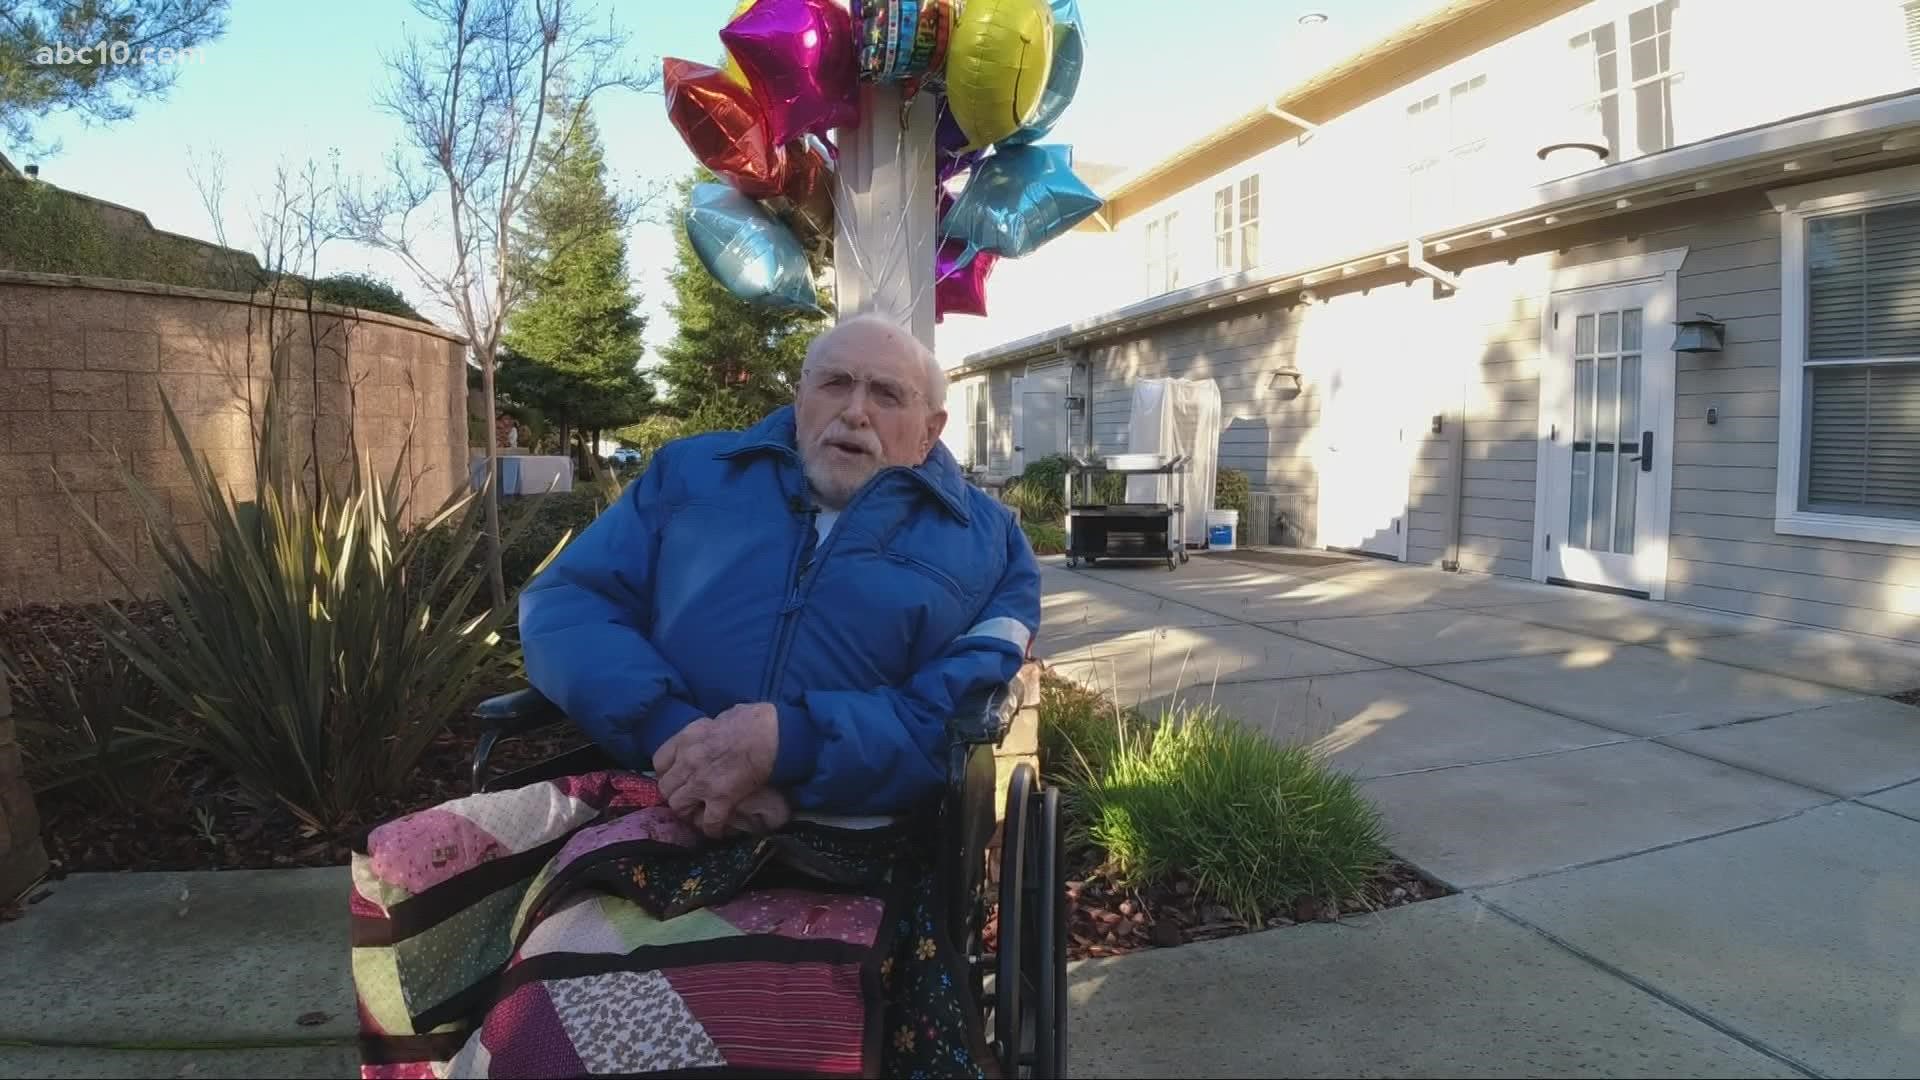 Ron Scott of Rocklin delivers a birthday message as he reaches the age of 105 Monday.